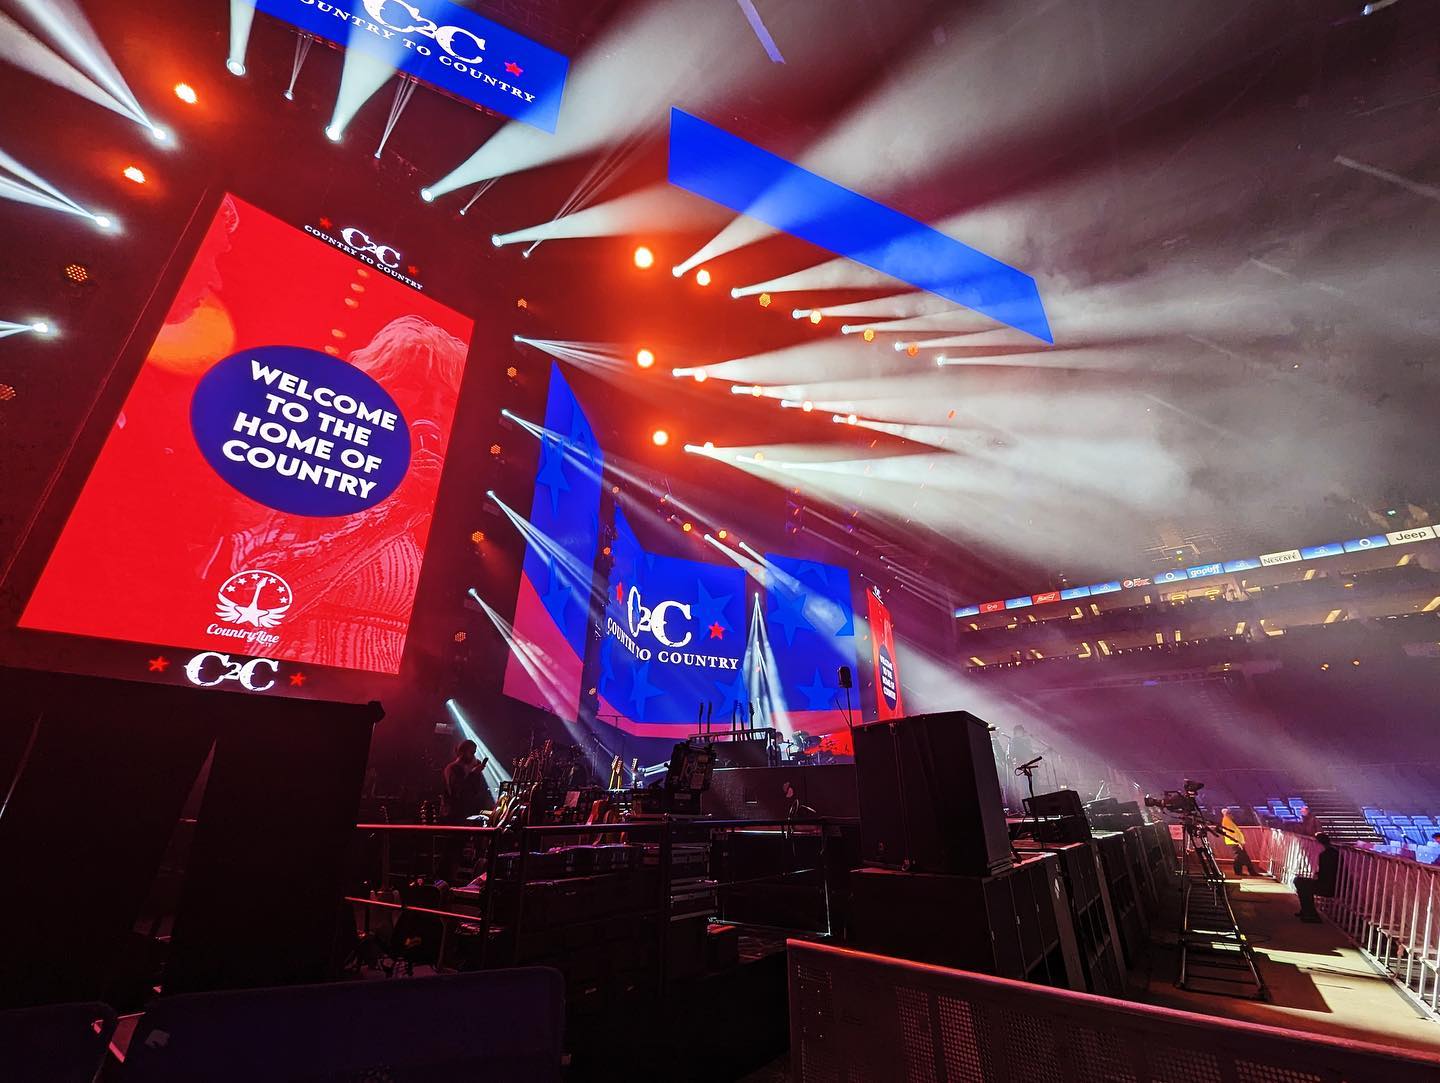 PRG UK was thrilled to be in the heart of the action once again this year, delivering lighting, rigging, LED, servers, and cameras to C2C’s London and Glasgow shows.